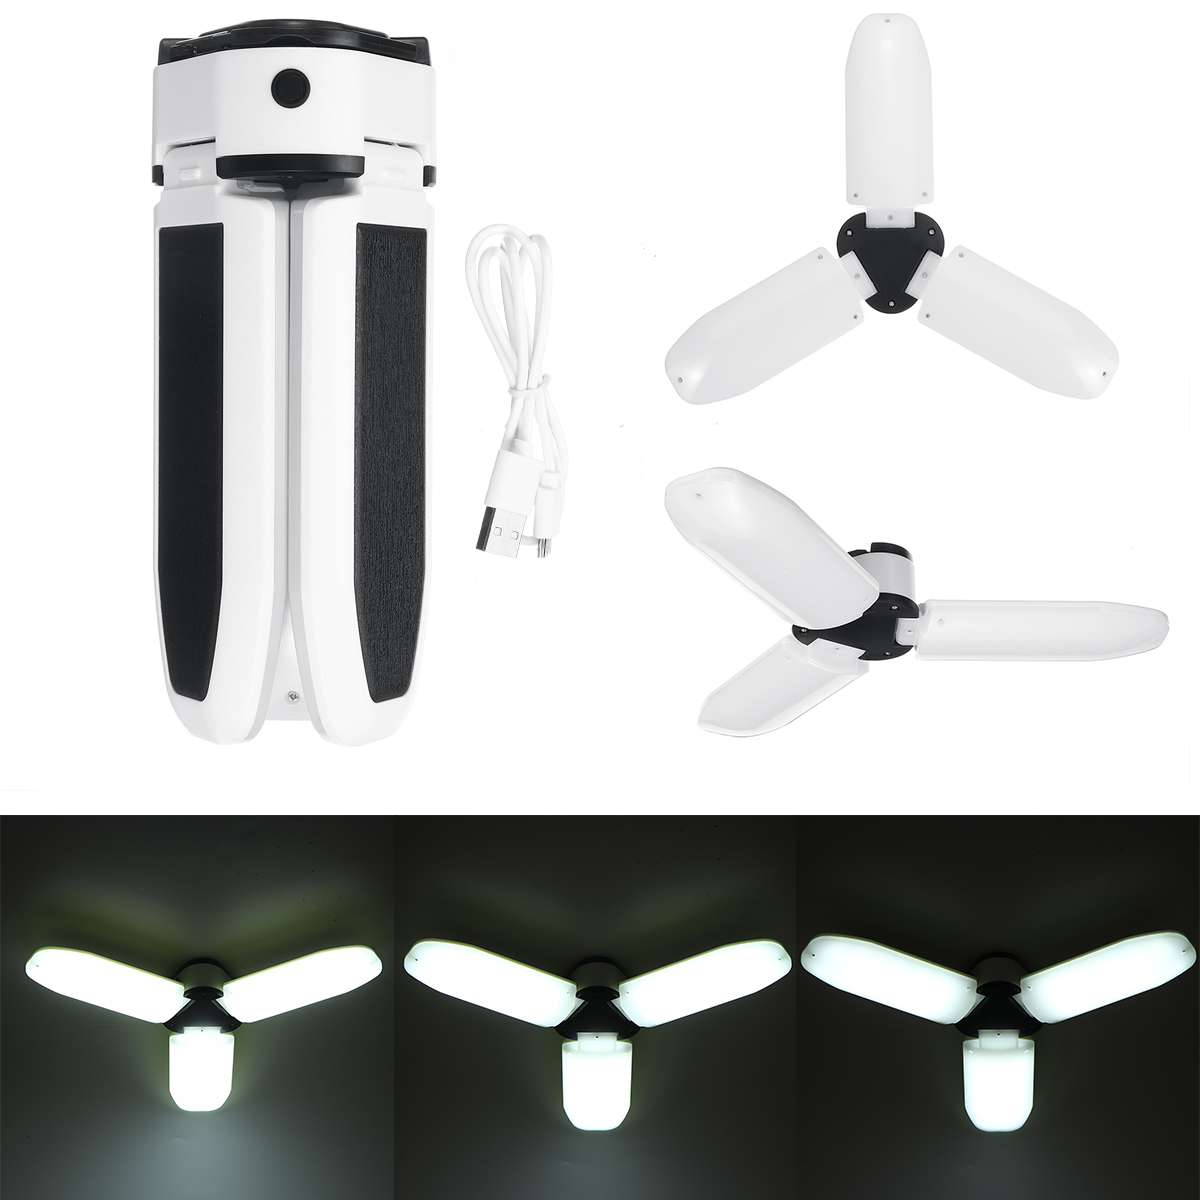 Rechargeable-USB-60LED-Solar-Garage-Light-Three-Leaves-Multifunctional-Emergency-Camping-Ceiling-Lam-1677180-2